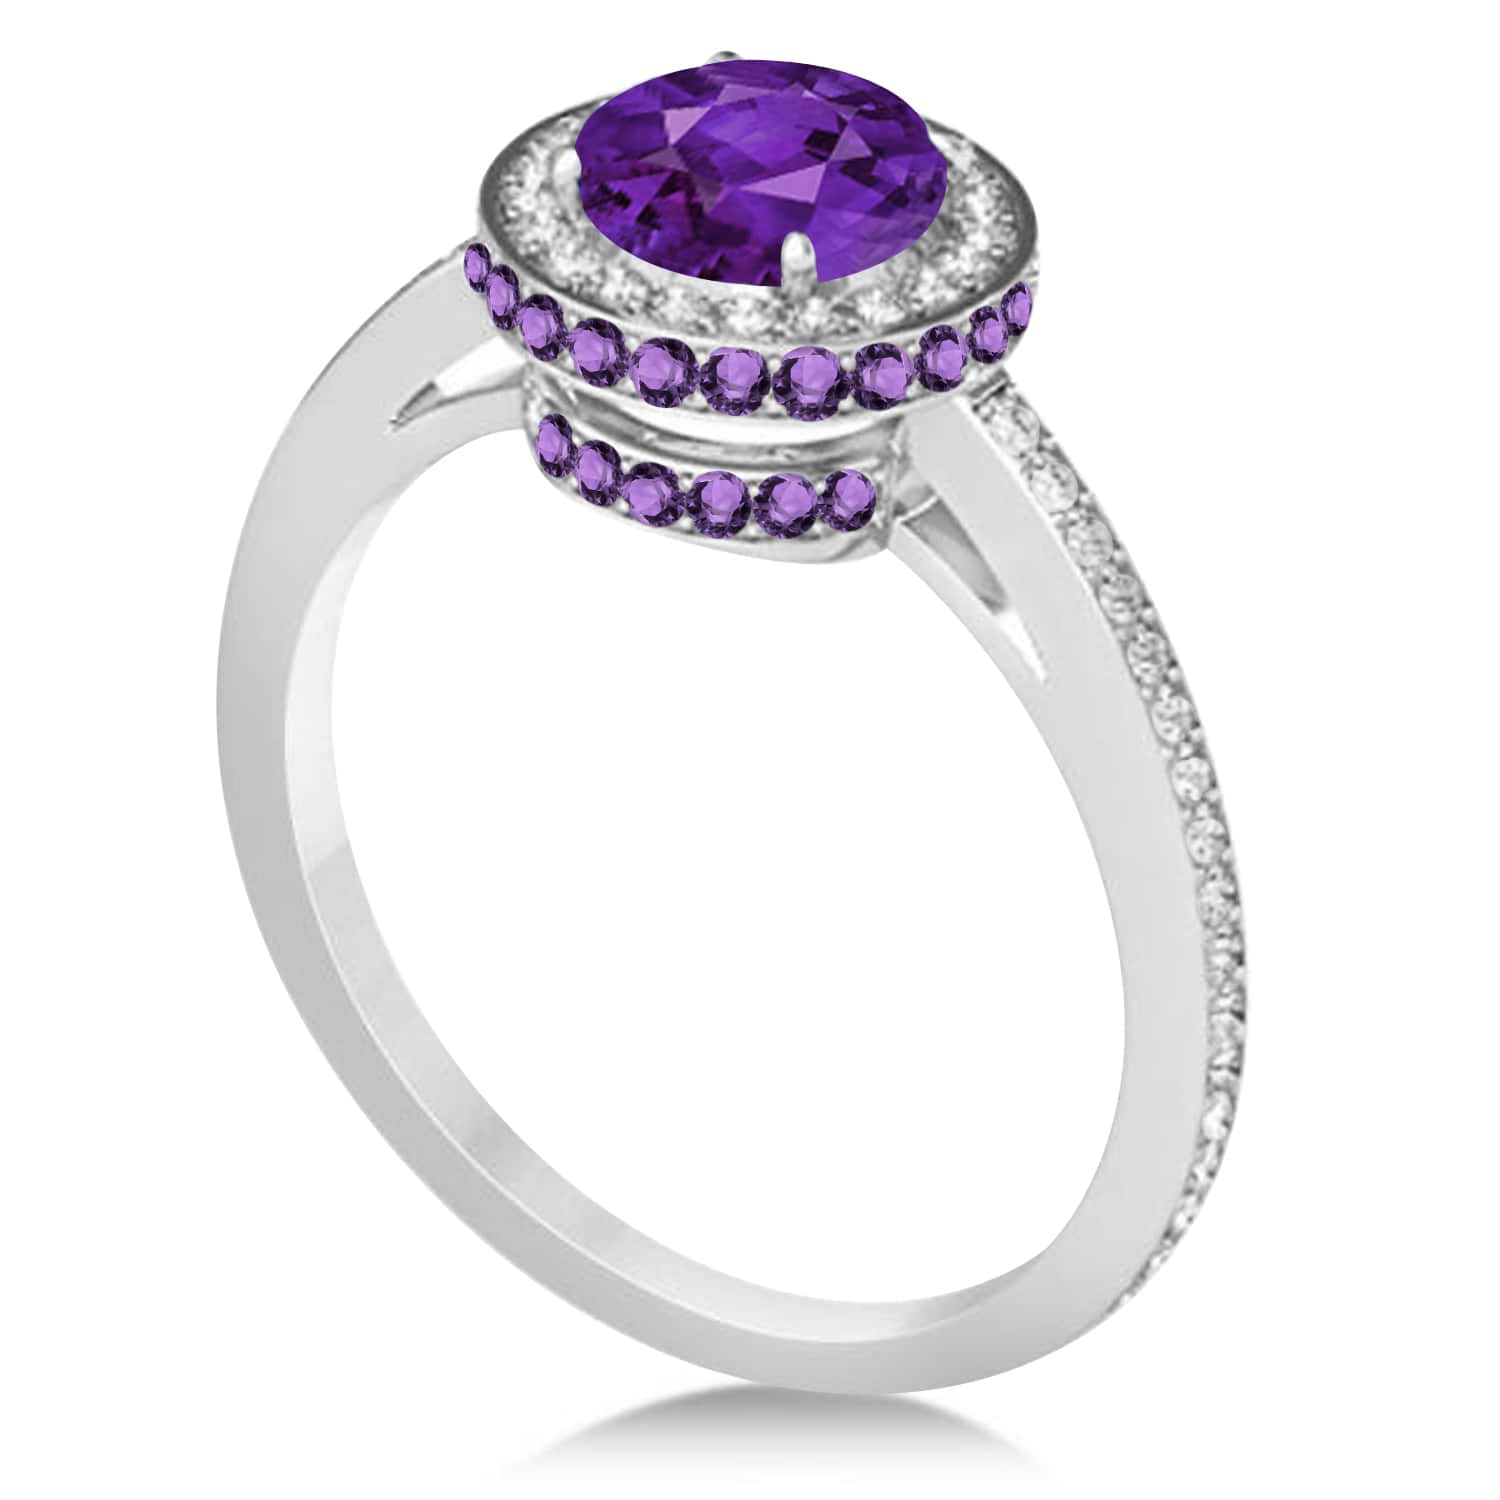 Oval Amethyst & Diamond Halo Engagement Ring 14k White Gold (1.75ct)